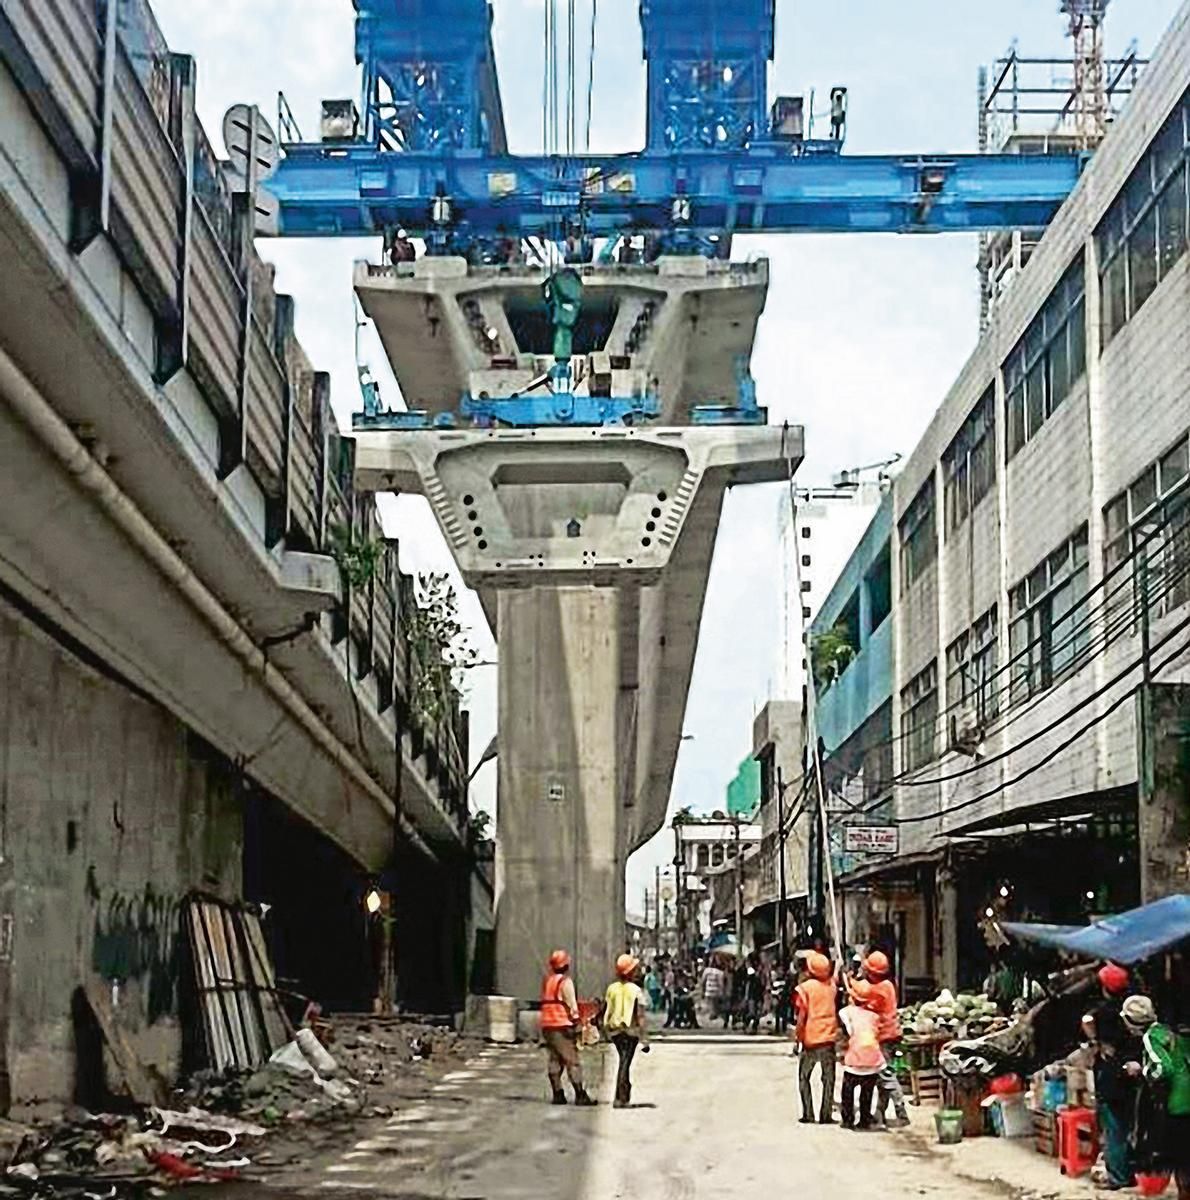 Media File No. 316231 The viaduct is being built using the span by span method with an overhead launching gantry to comply with the limited schedule and to reduce traffic obstruction to a minimum.